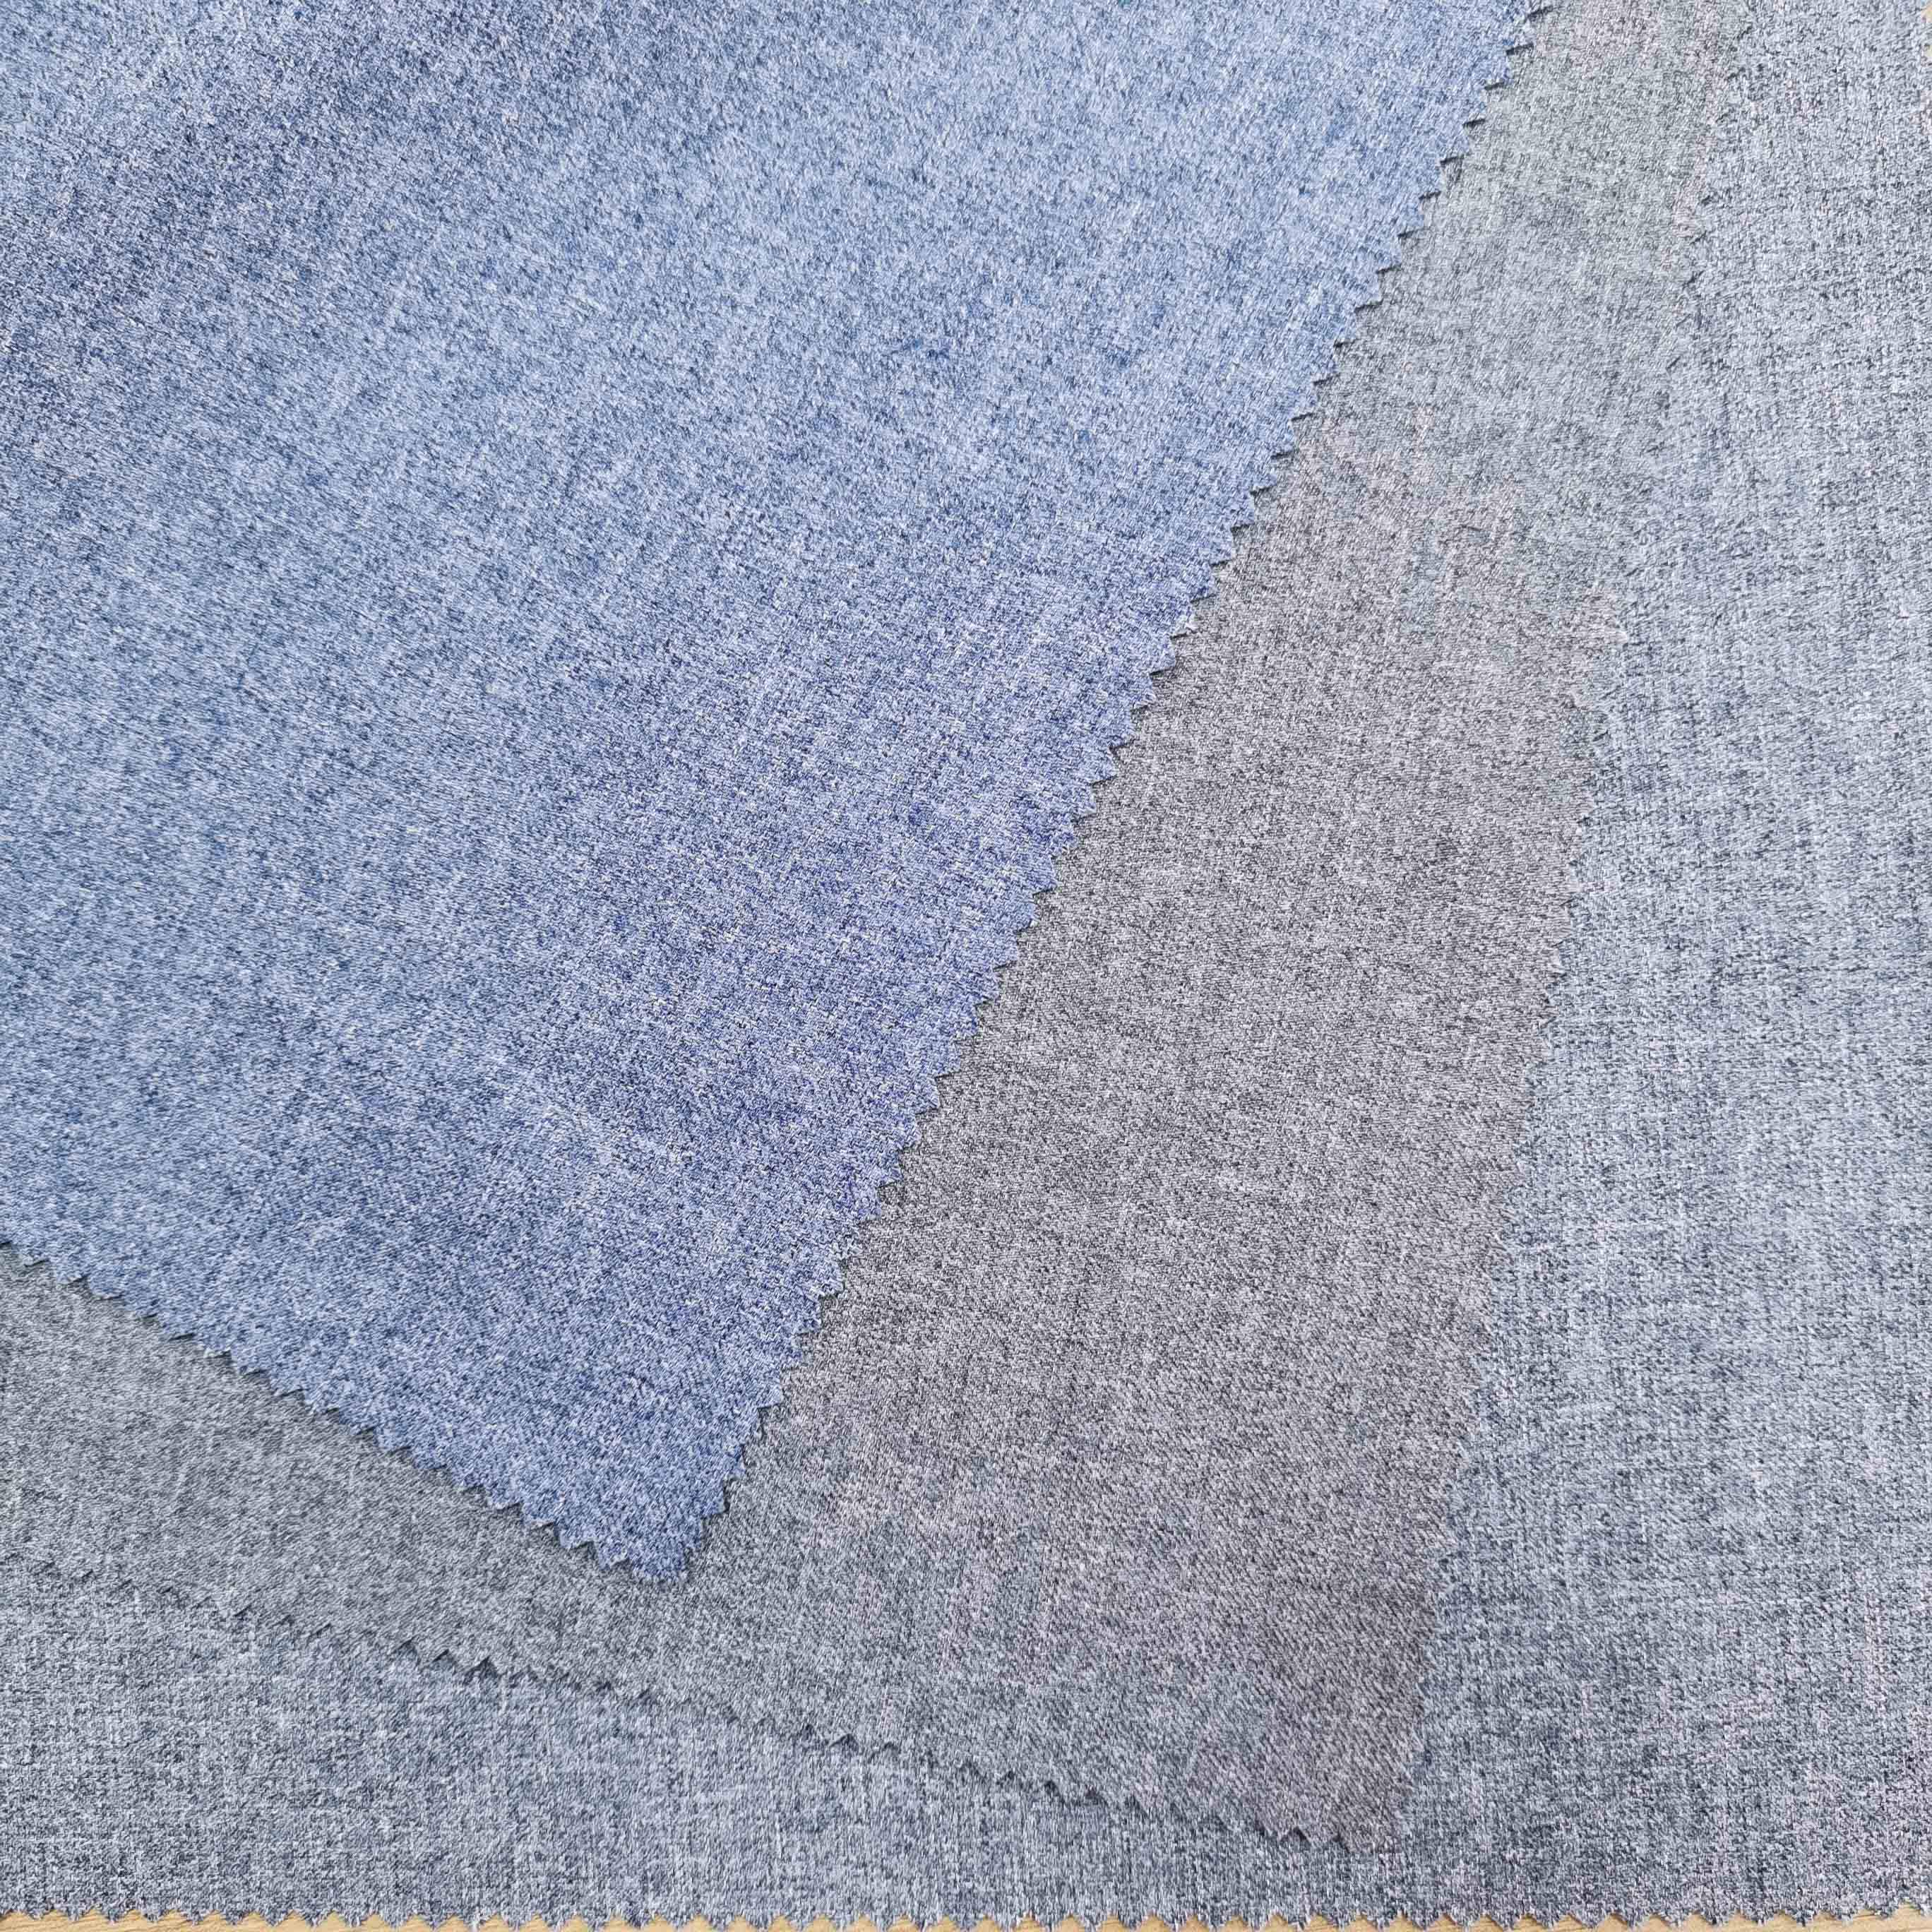 Hot selling 100% polyester heather grey peach finish fabric